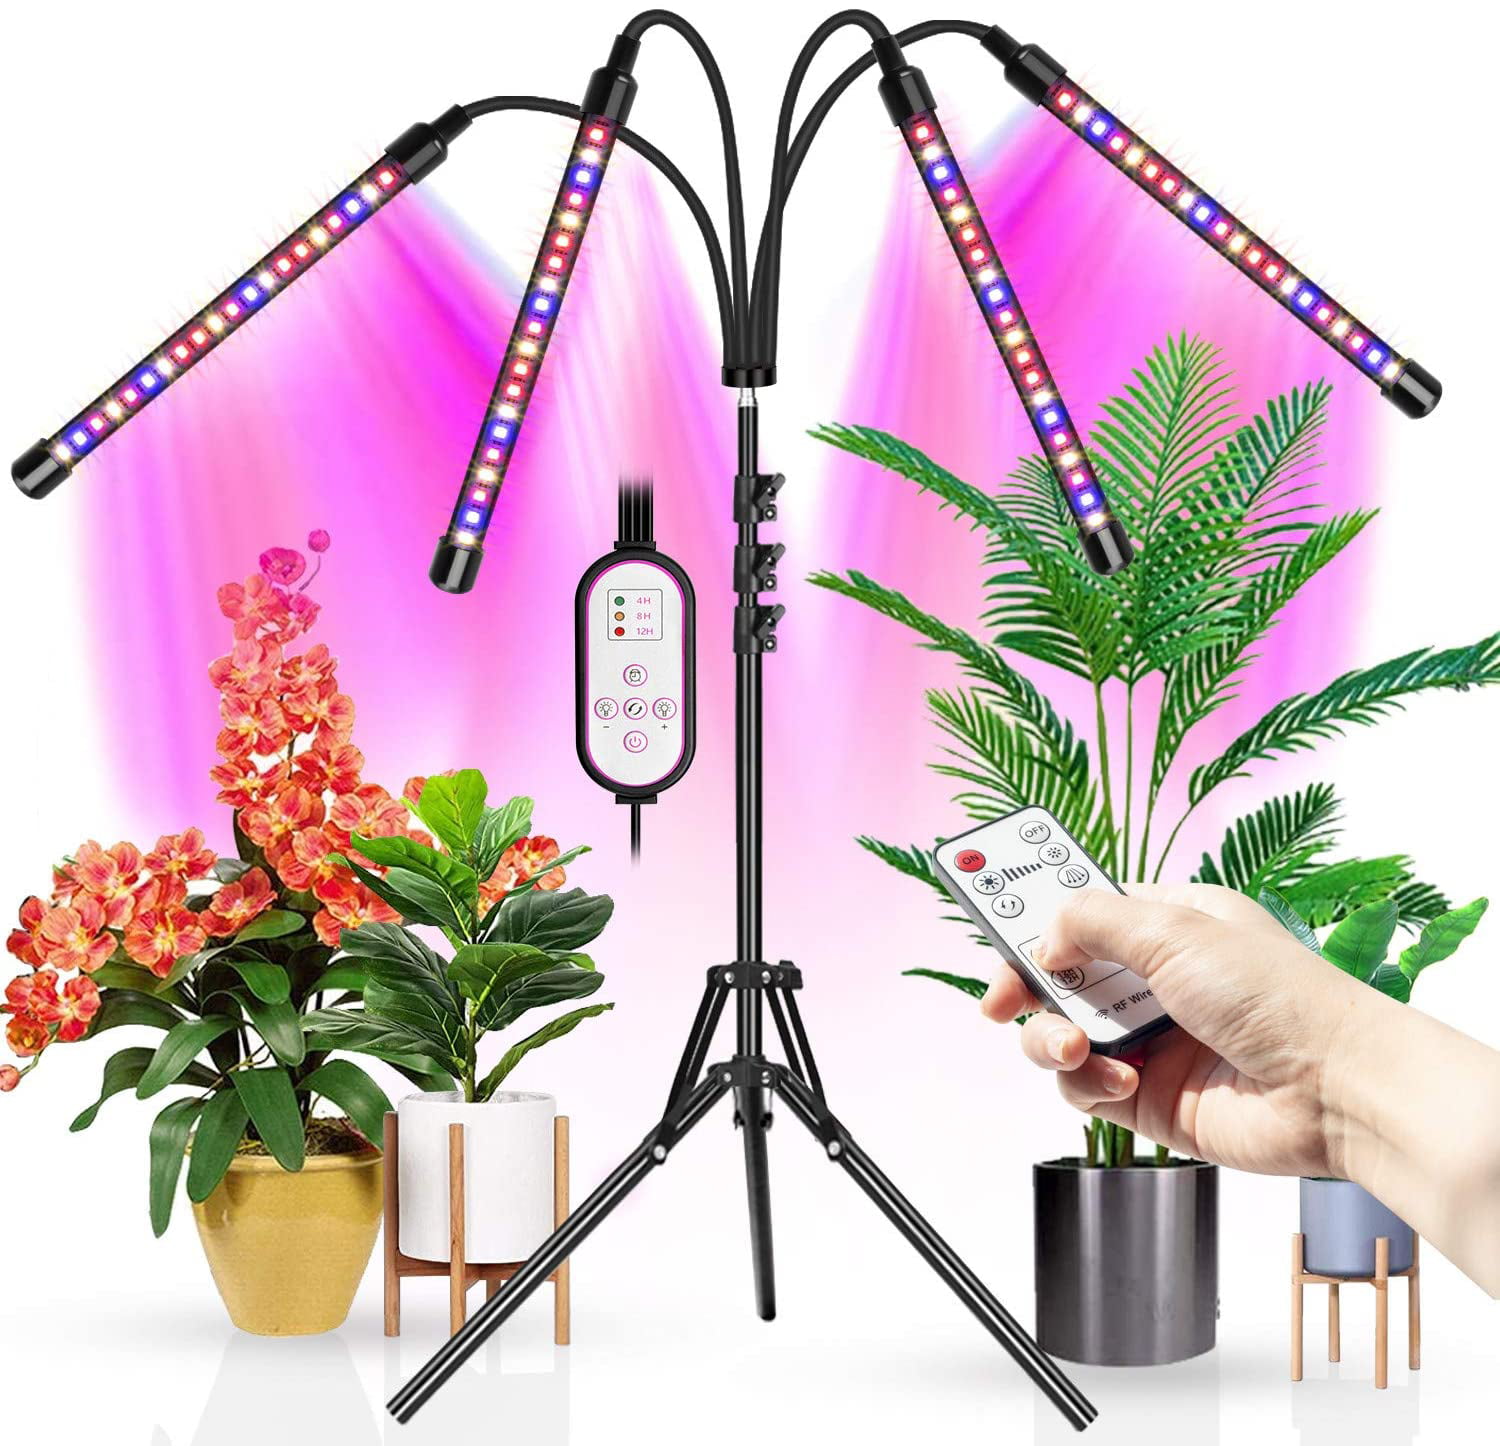 40W LED 9 Kinds of dimmable Plant Light Black7 Suitable for Indoor Plants TangN Plant Grow Light with Stand Stand Tripod Adjusted 11-63 in Control Timer Remote Four-Head Full-Spectrum Floor Plant Light 